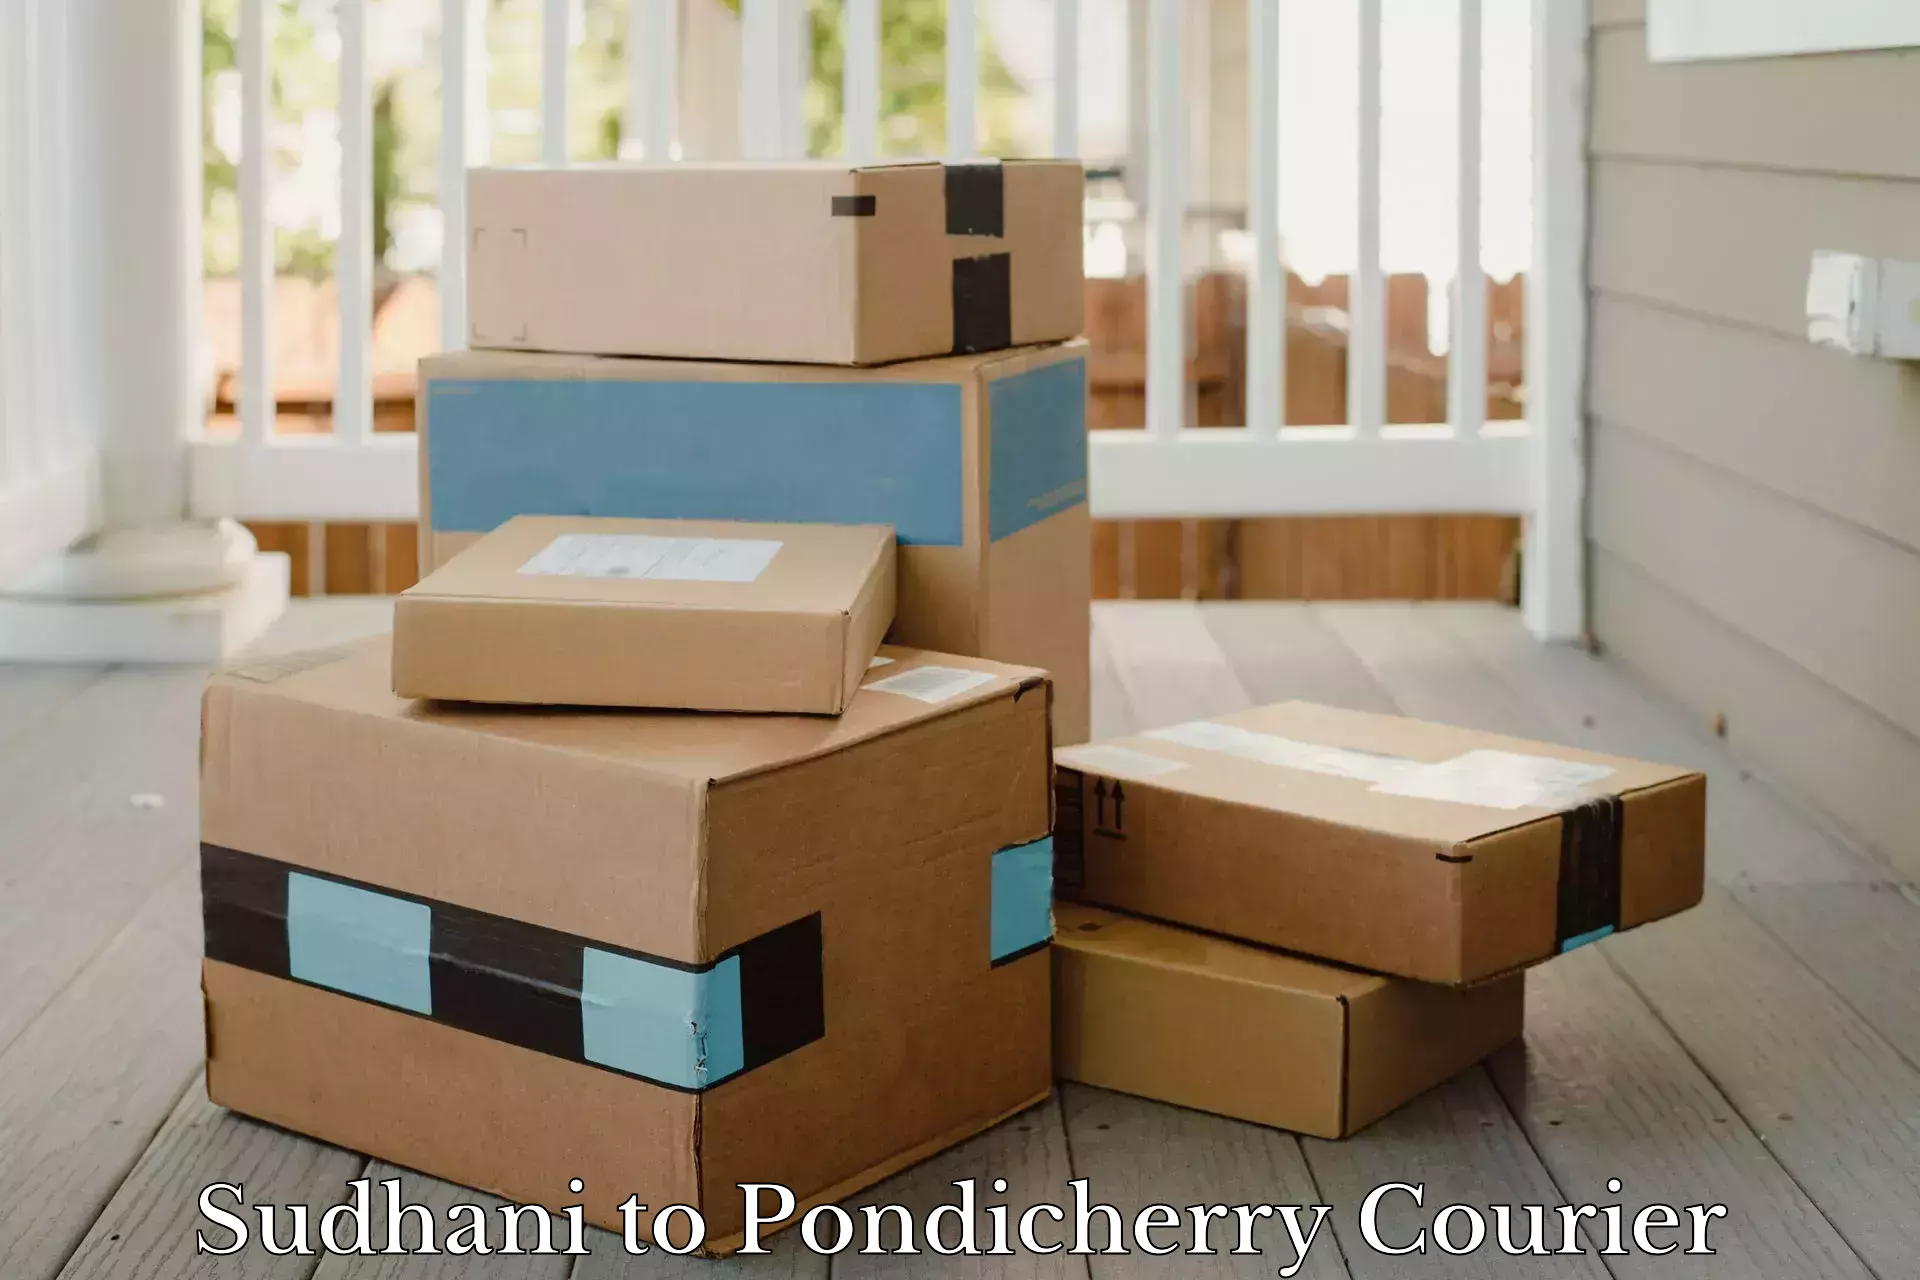 Residential courier service Sudhani to Pondicherry University